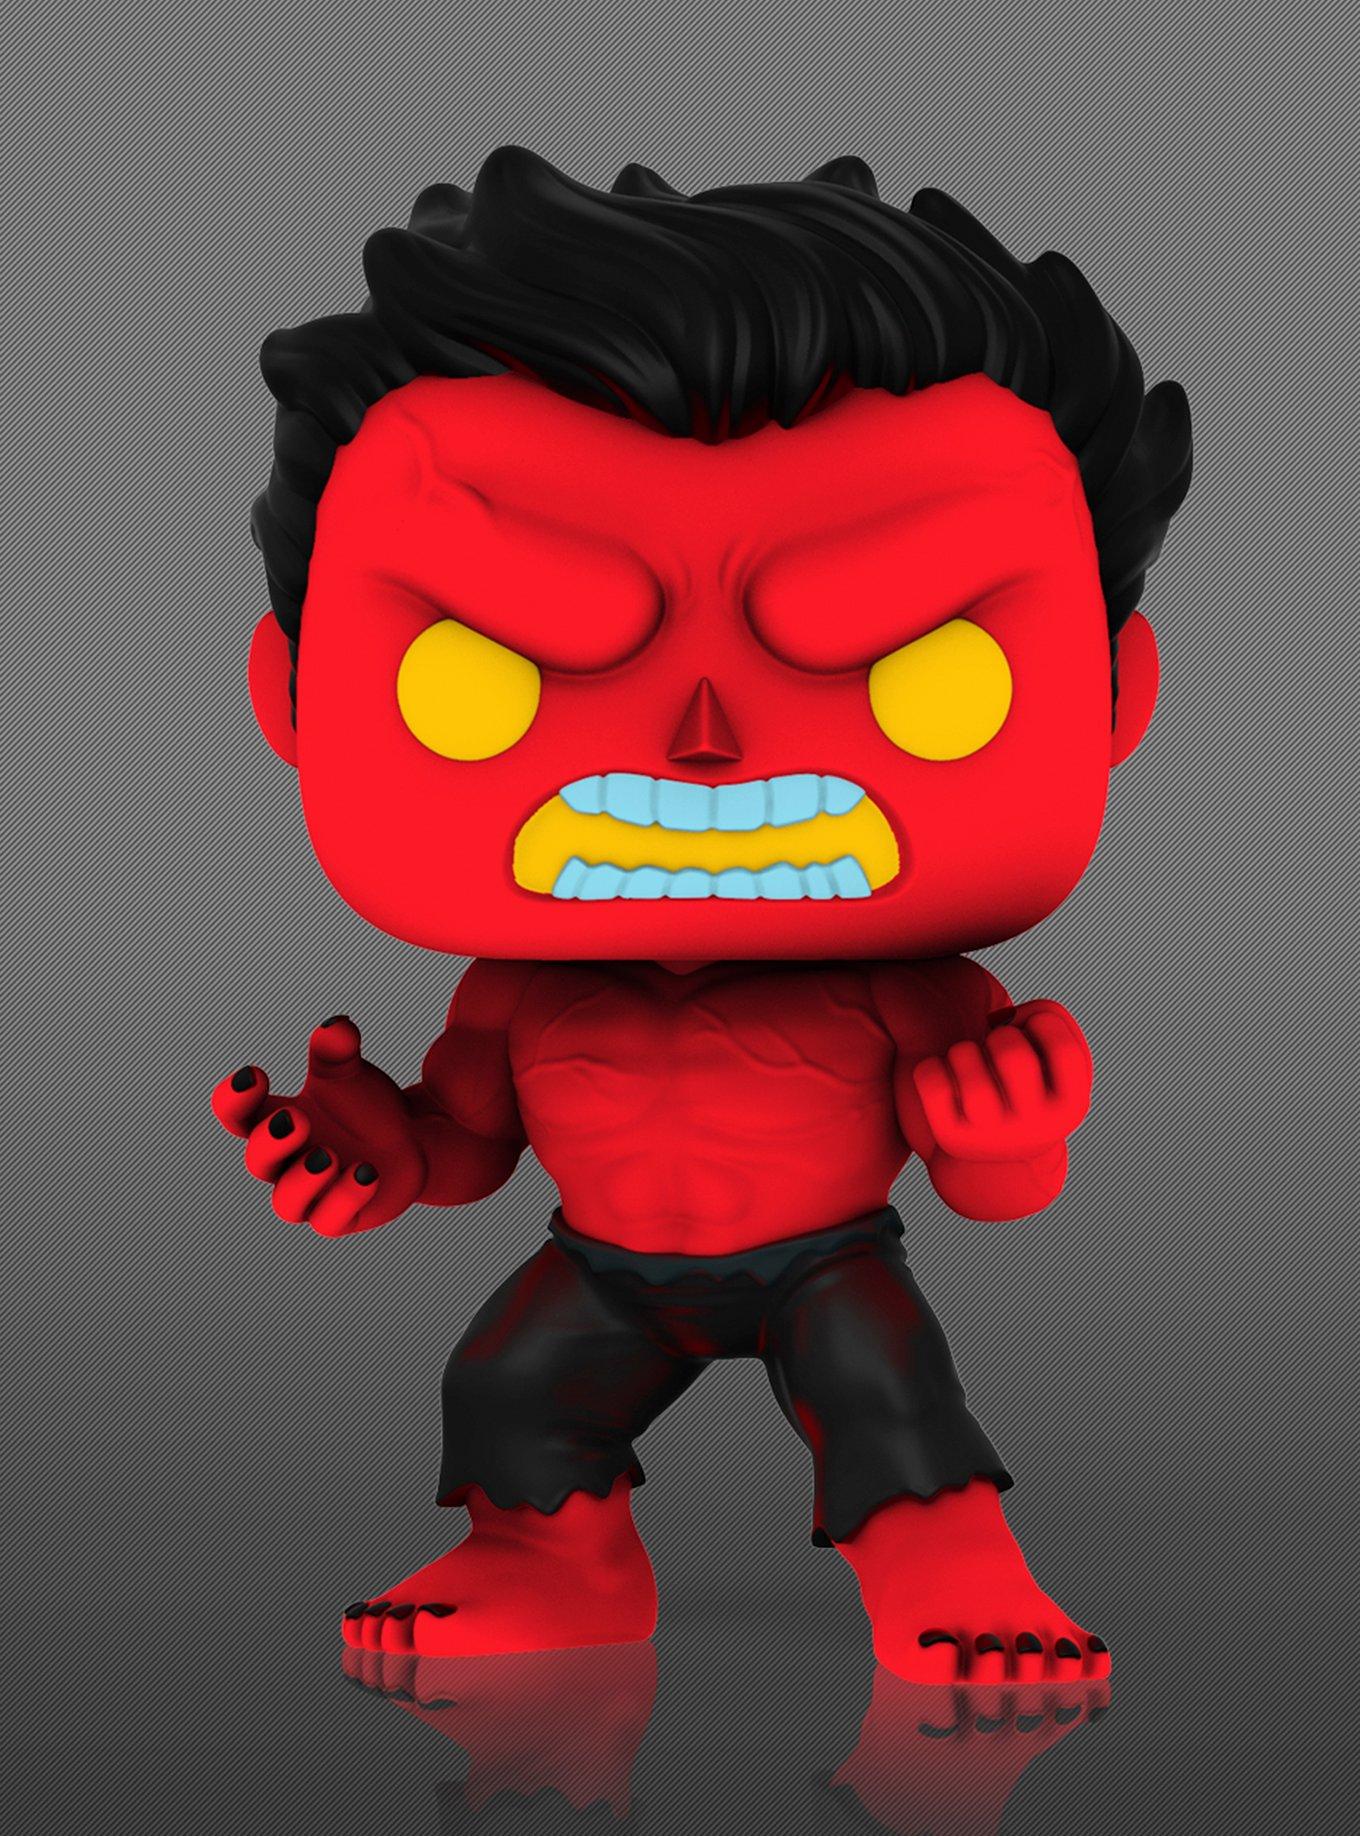 Funko Marvel Pop! Red Hulk With Glow-In-The-Dark Chase Vinyl Bobble-Head Hot Topic Exclusive, , alternate